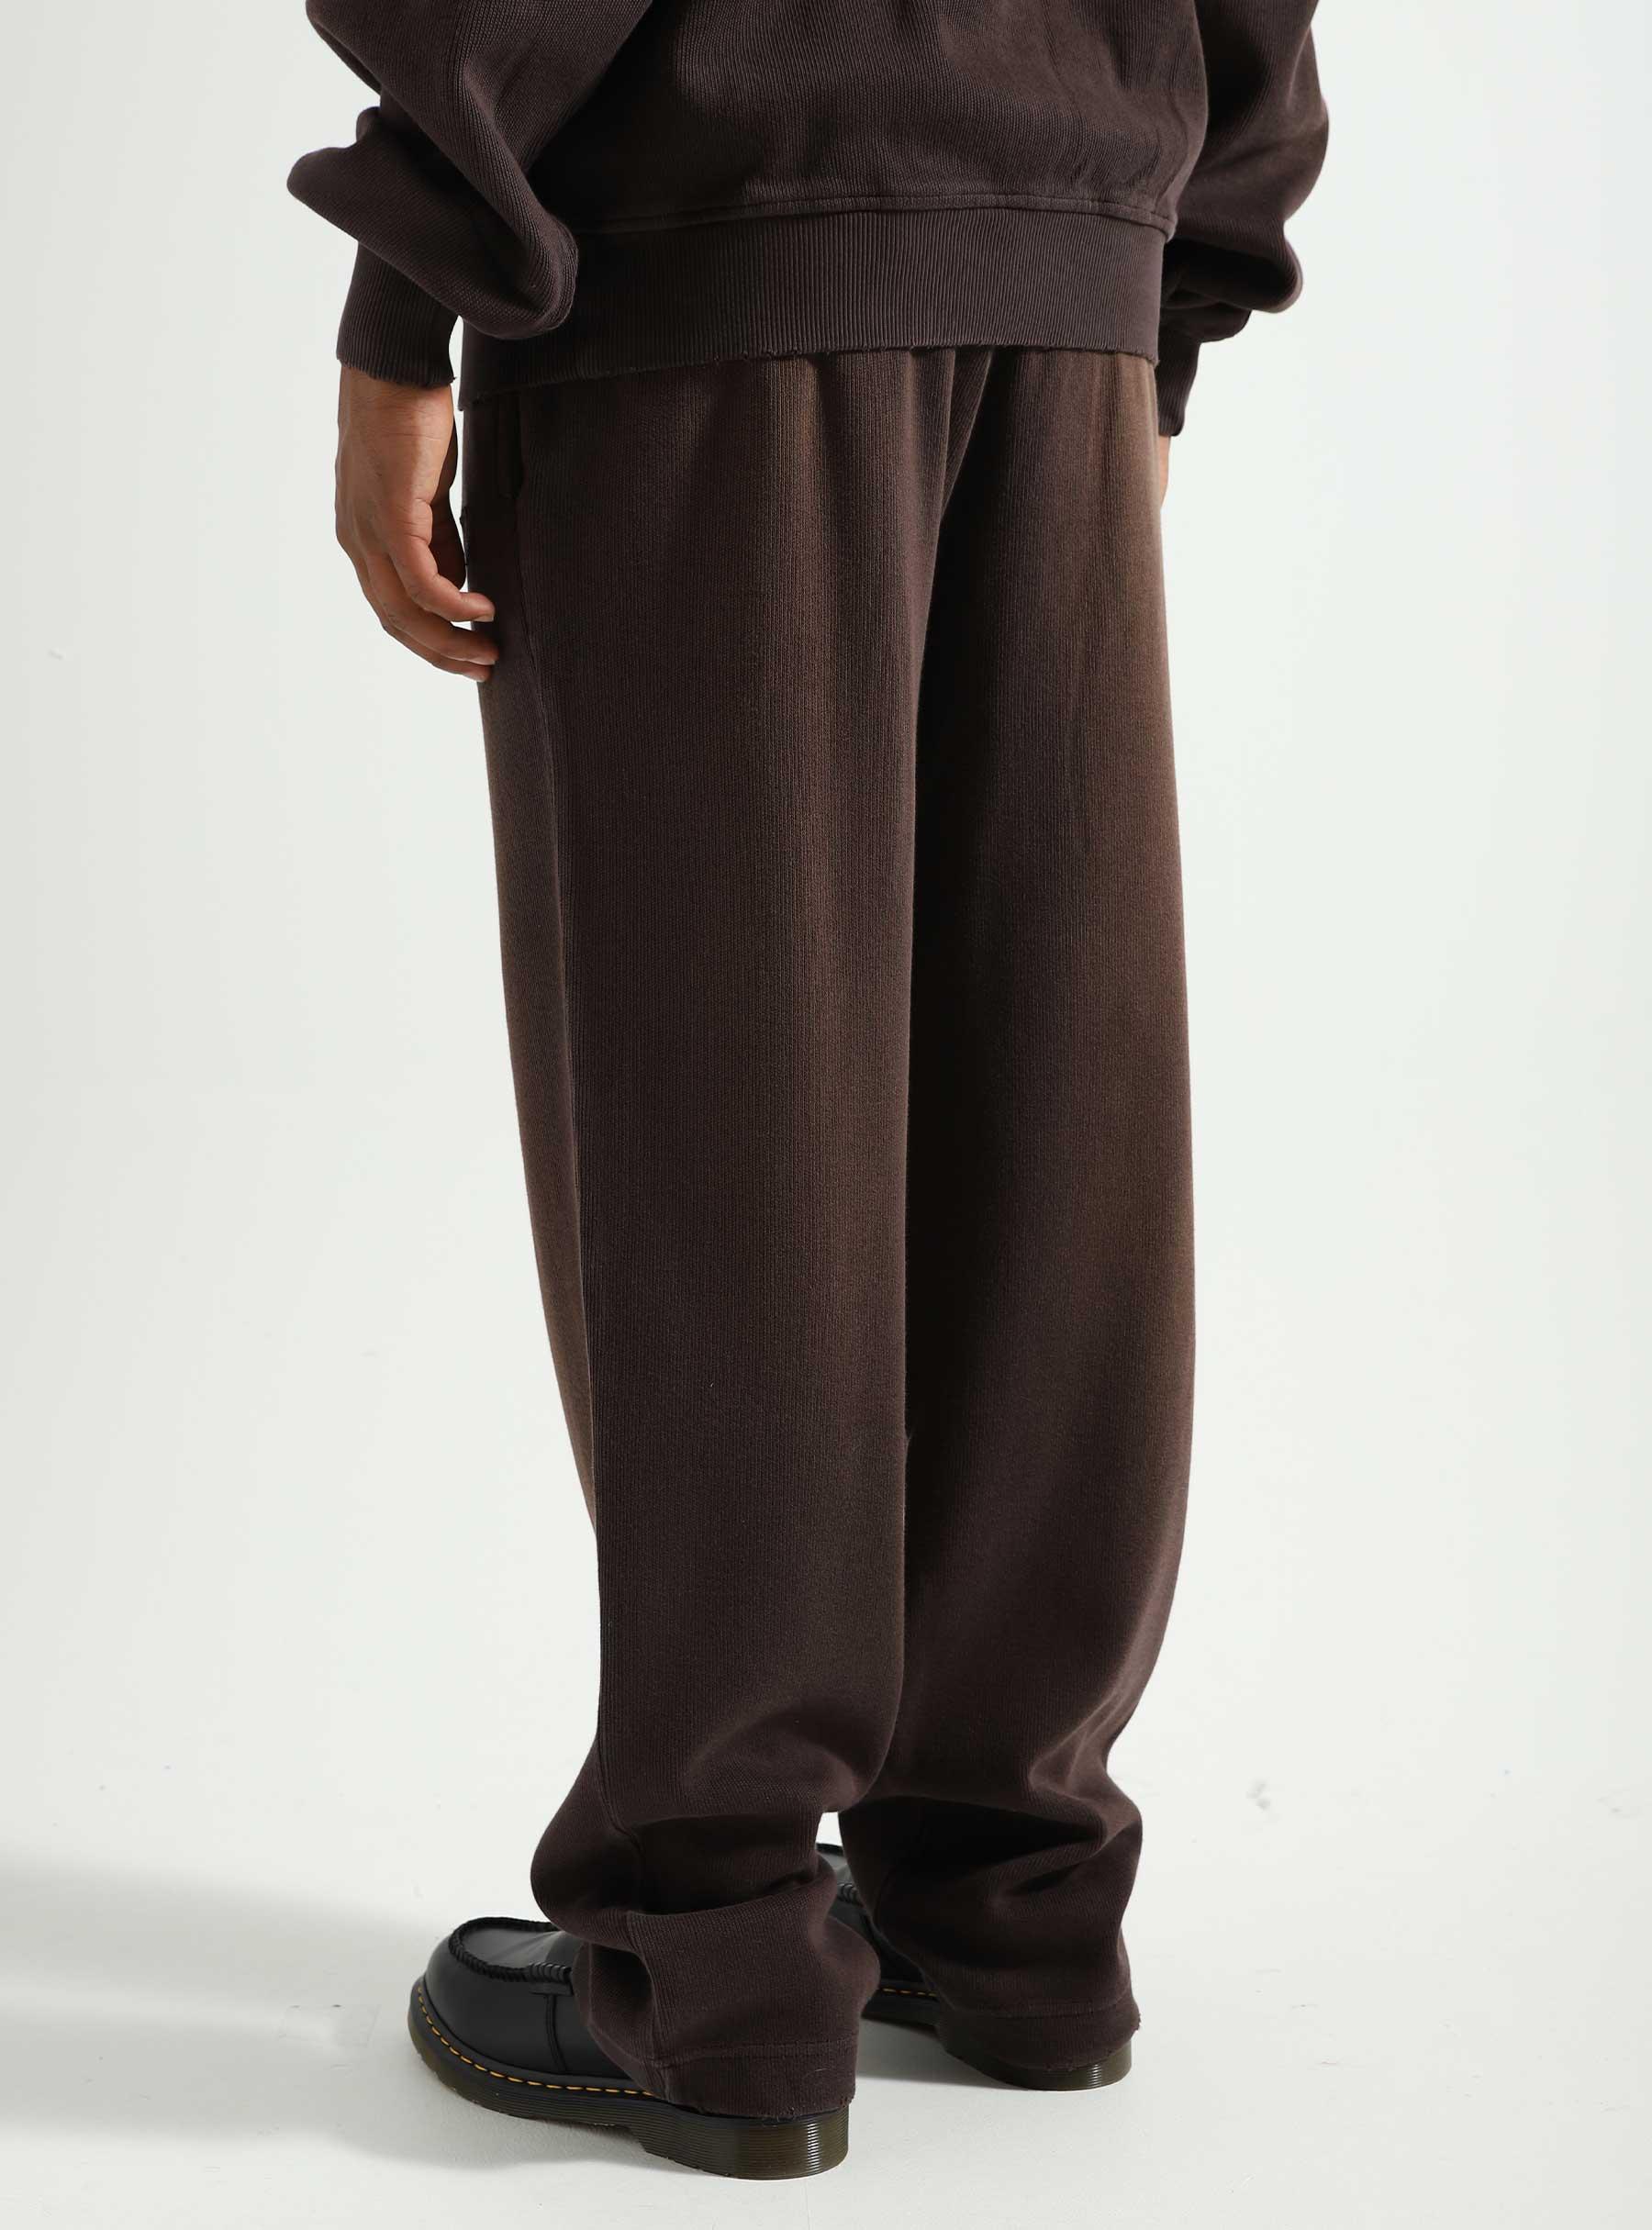 Rodell Pants Chocolate Brown 2321182